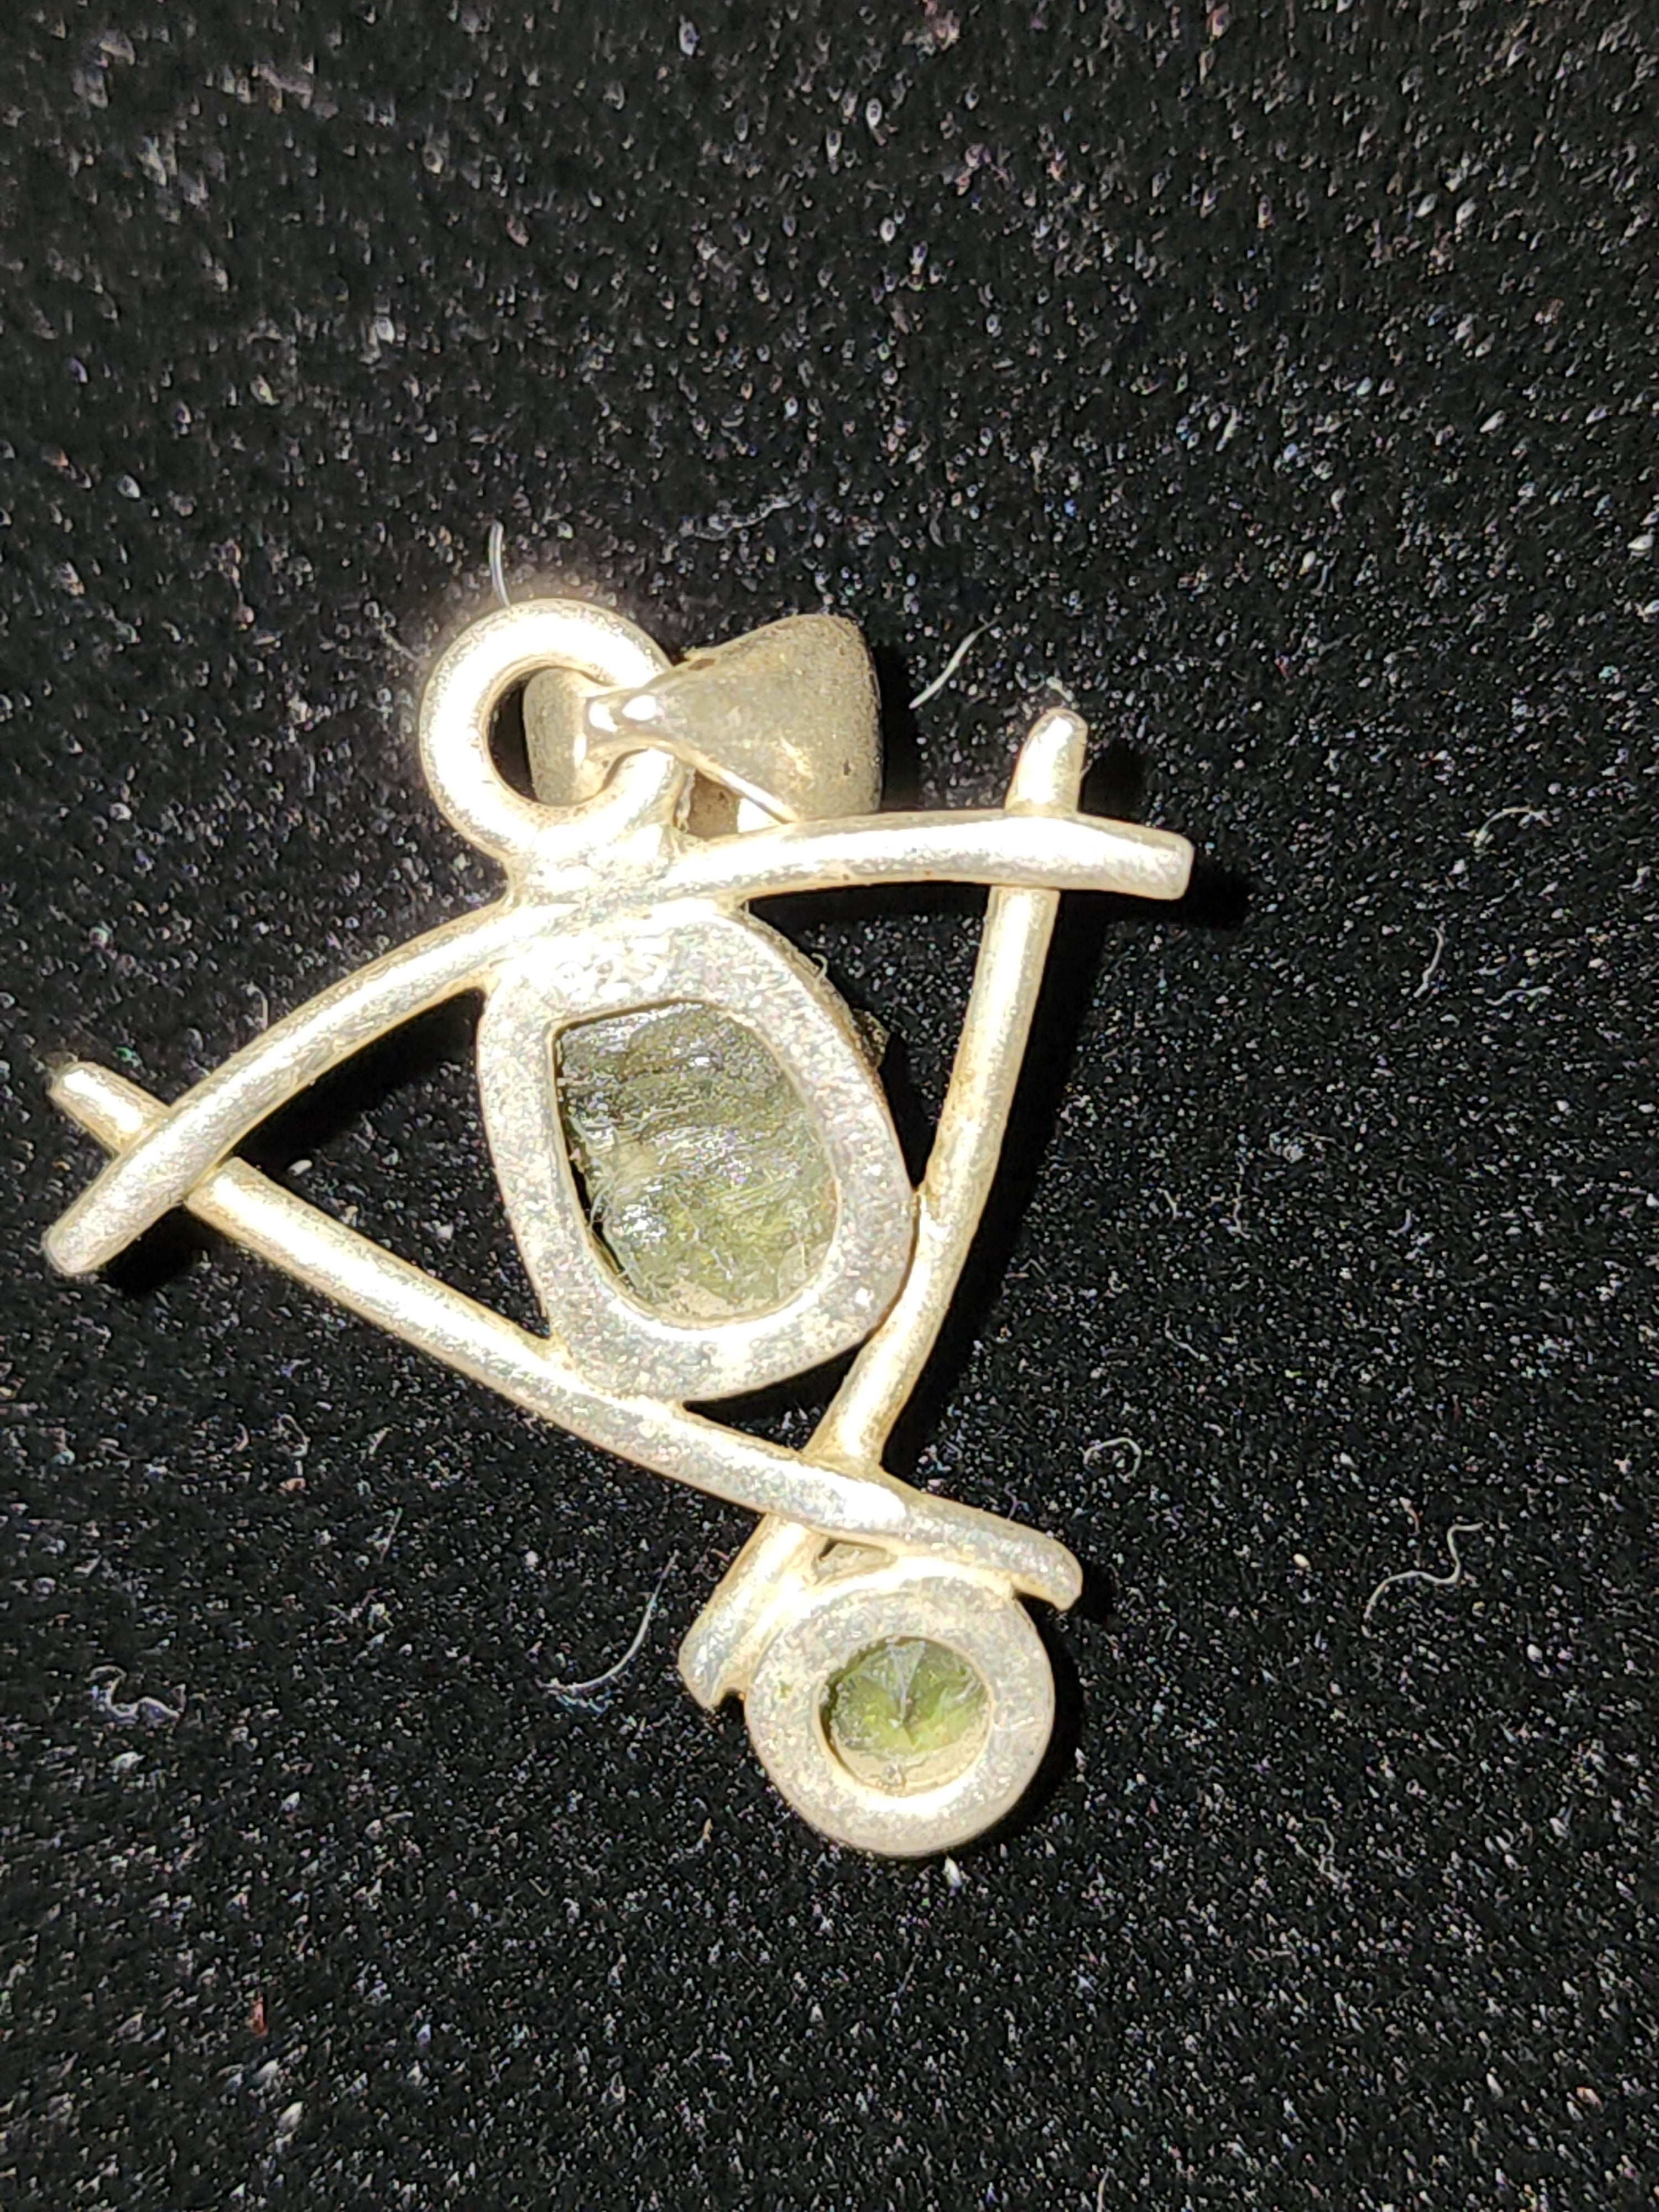 Chunk of Moldavite and Faceted peridot crystal pendant